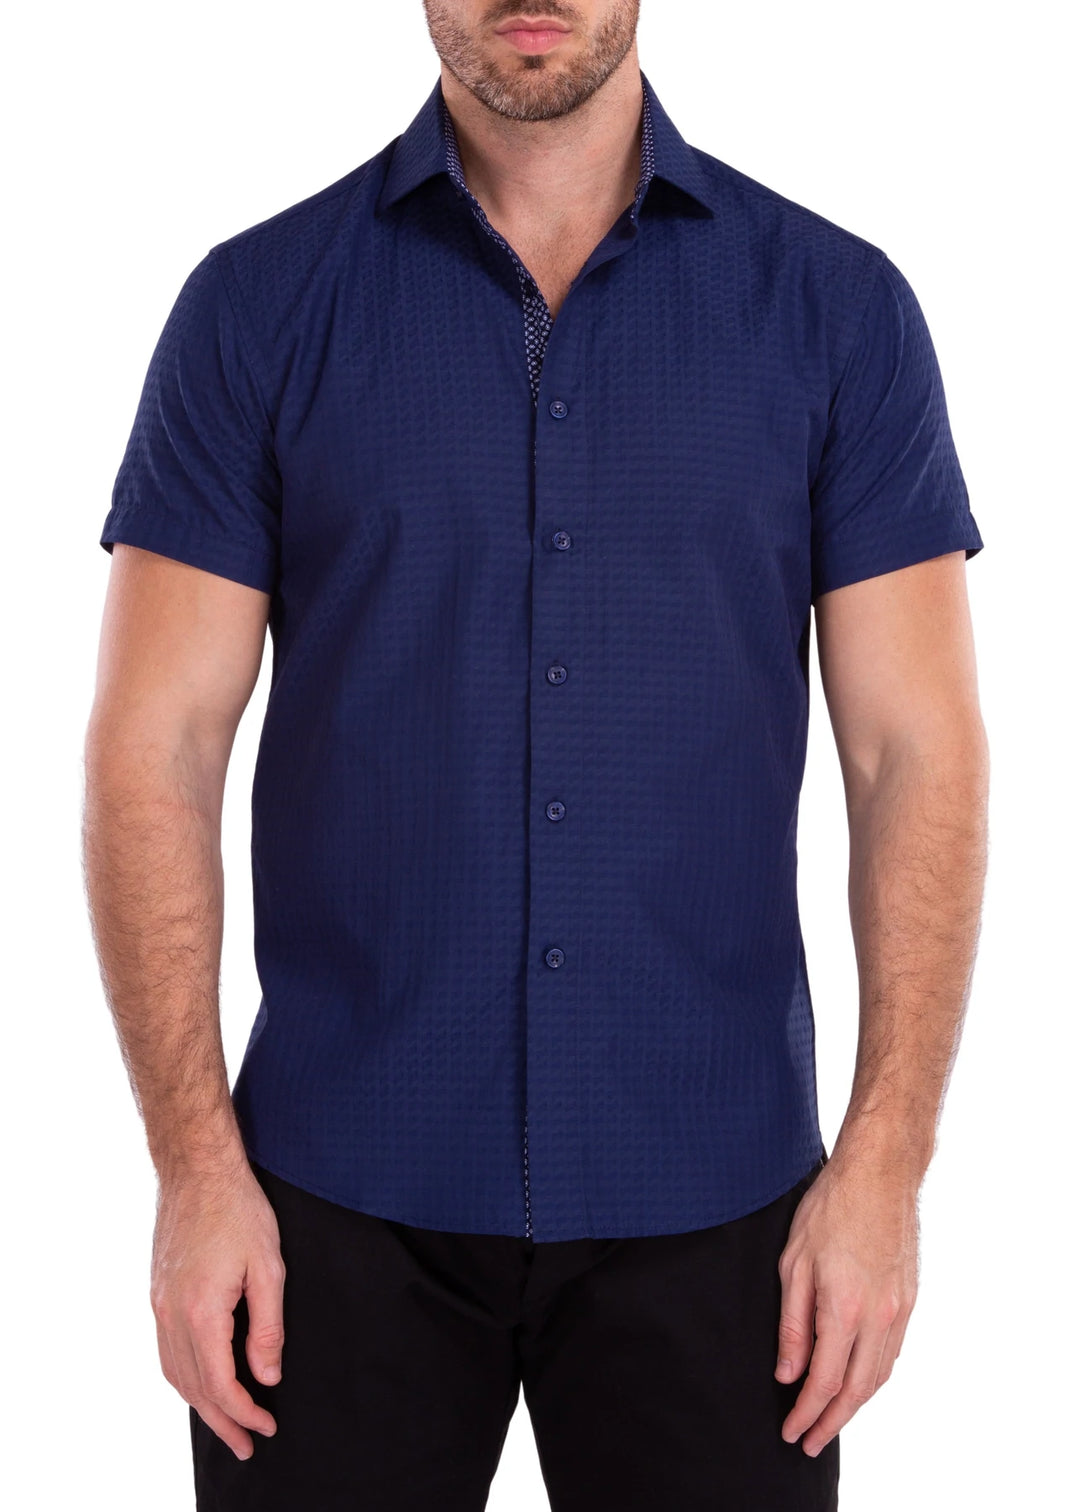 BeSpoke Collection Men's Navy Cotton Printed Button Down Short Sleeve Shirt - New York Man Suits